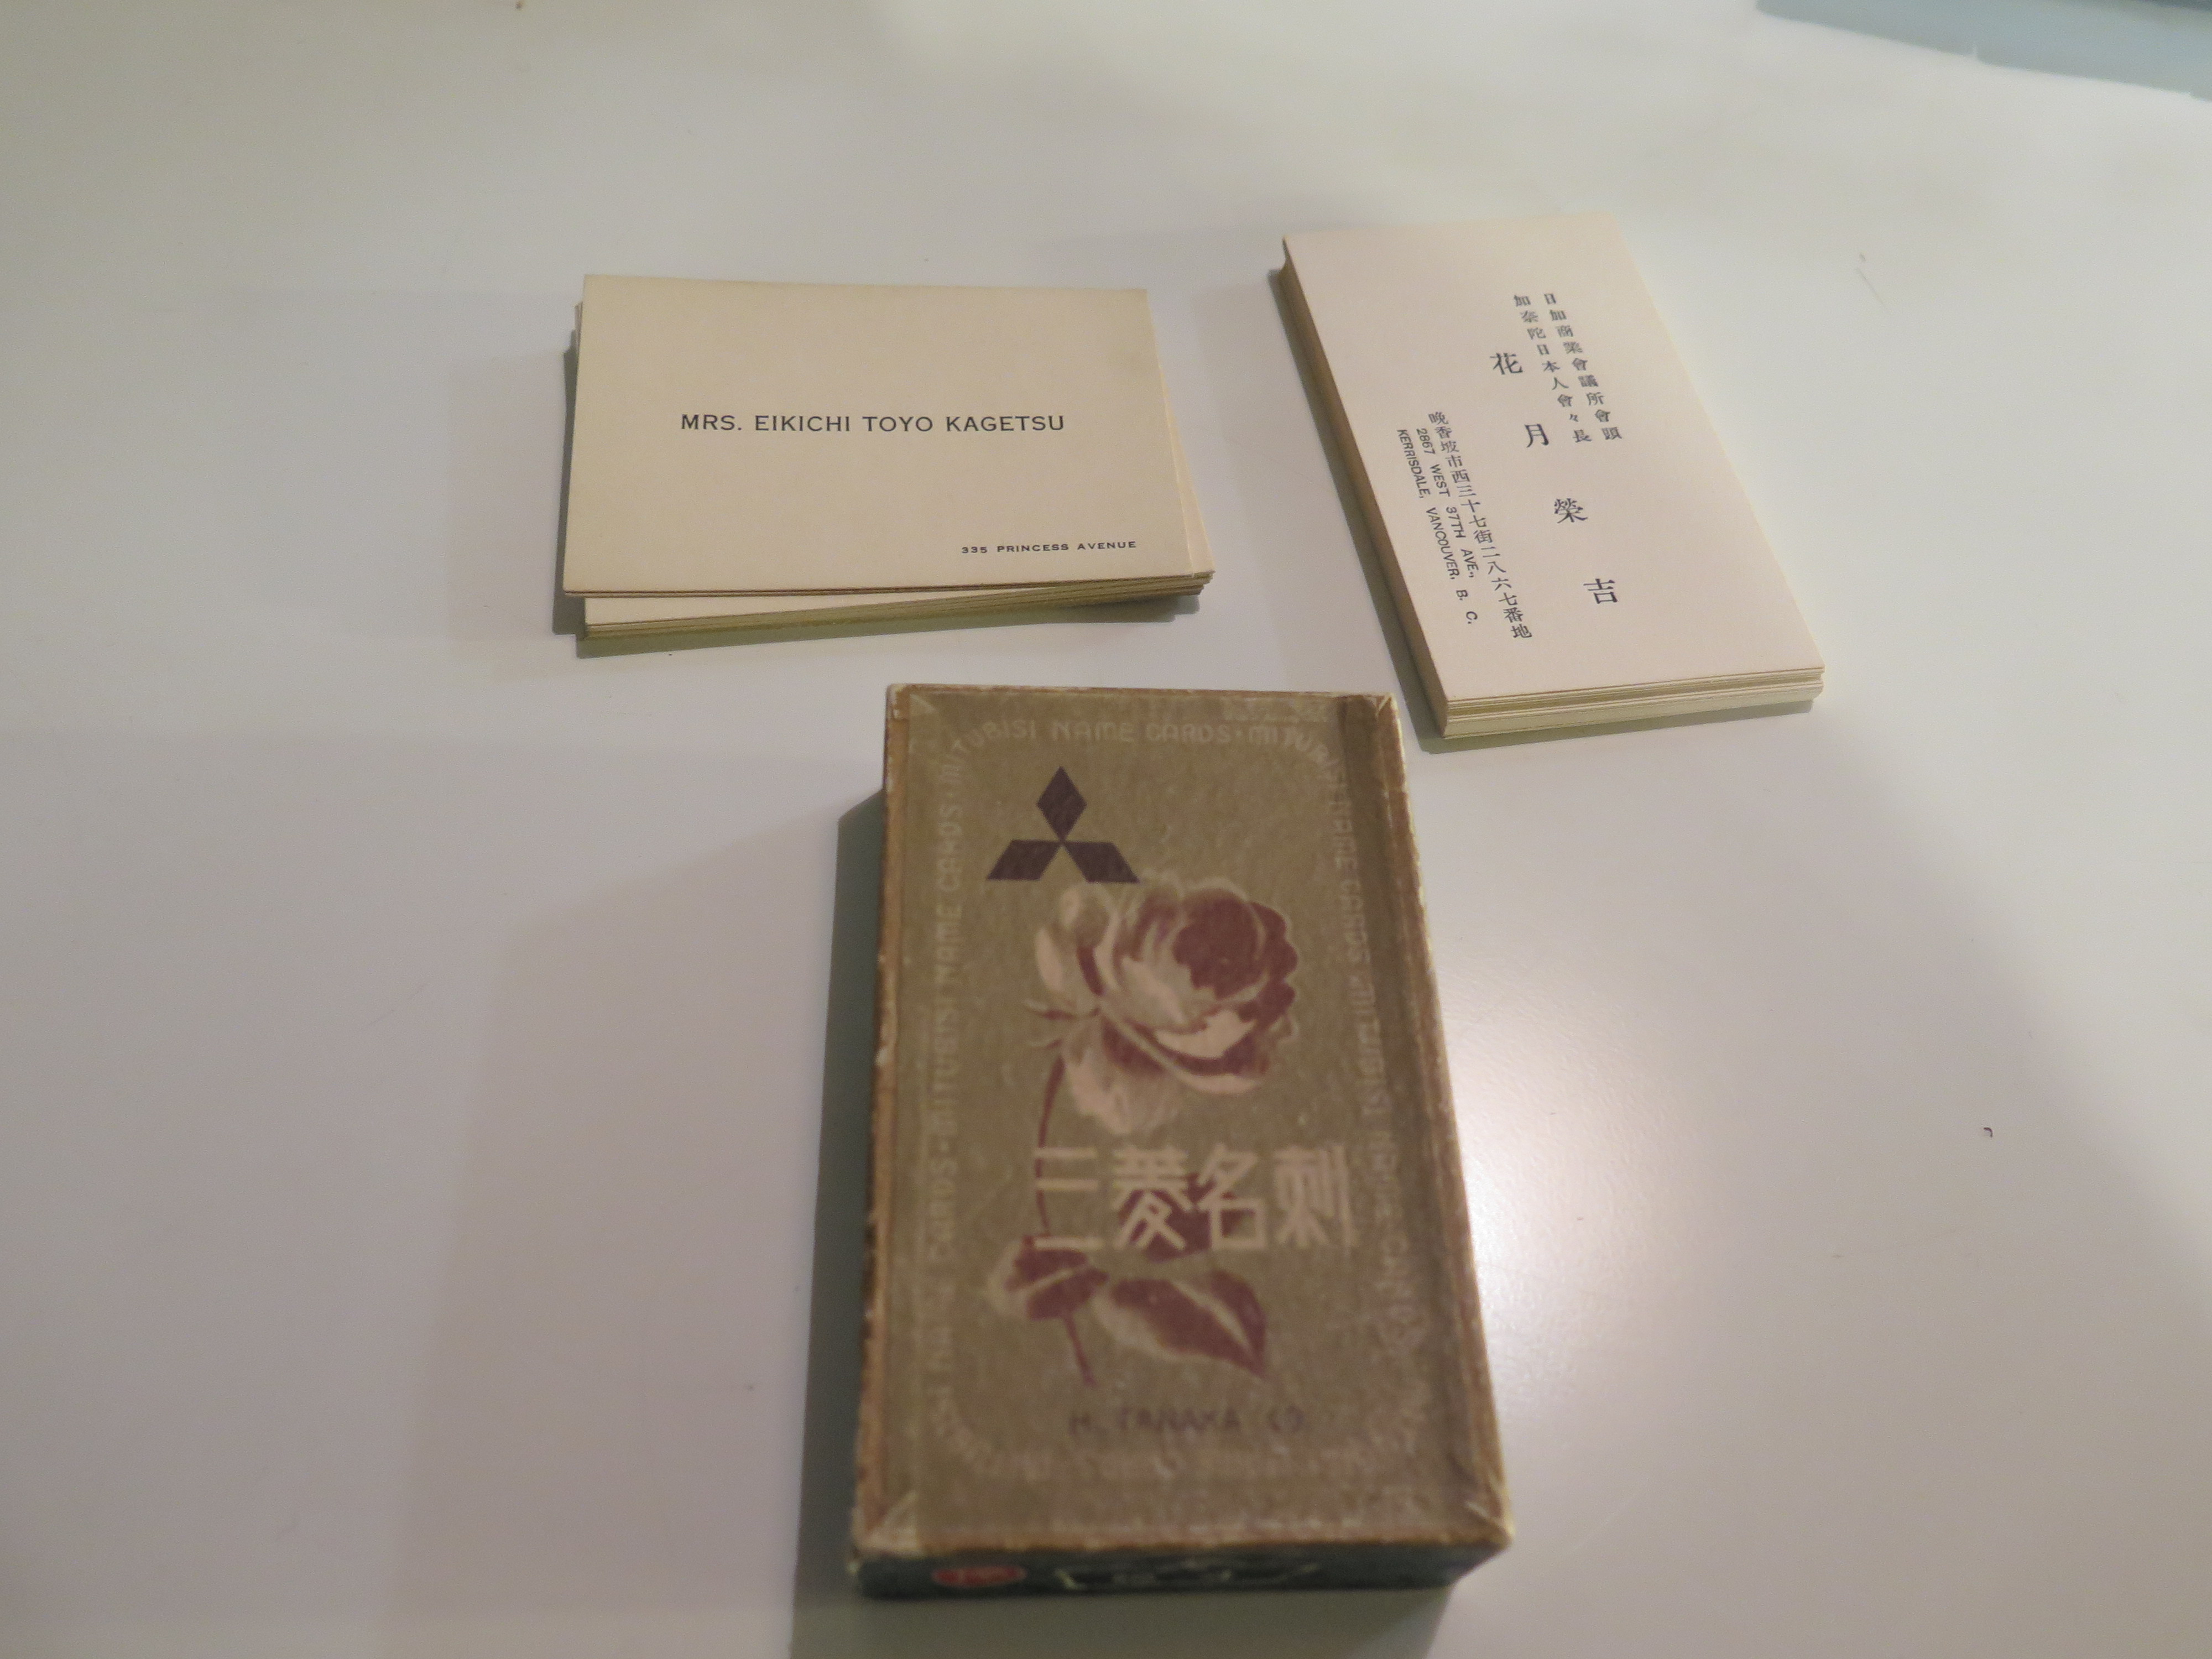 These are the calling cards of the wife of Eikichi Kagetsu, Mrs. Eikichi Toyo Kagetsu, from the pre-war period. Only the most prominent women in BC society would carry their own calling cards.